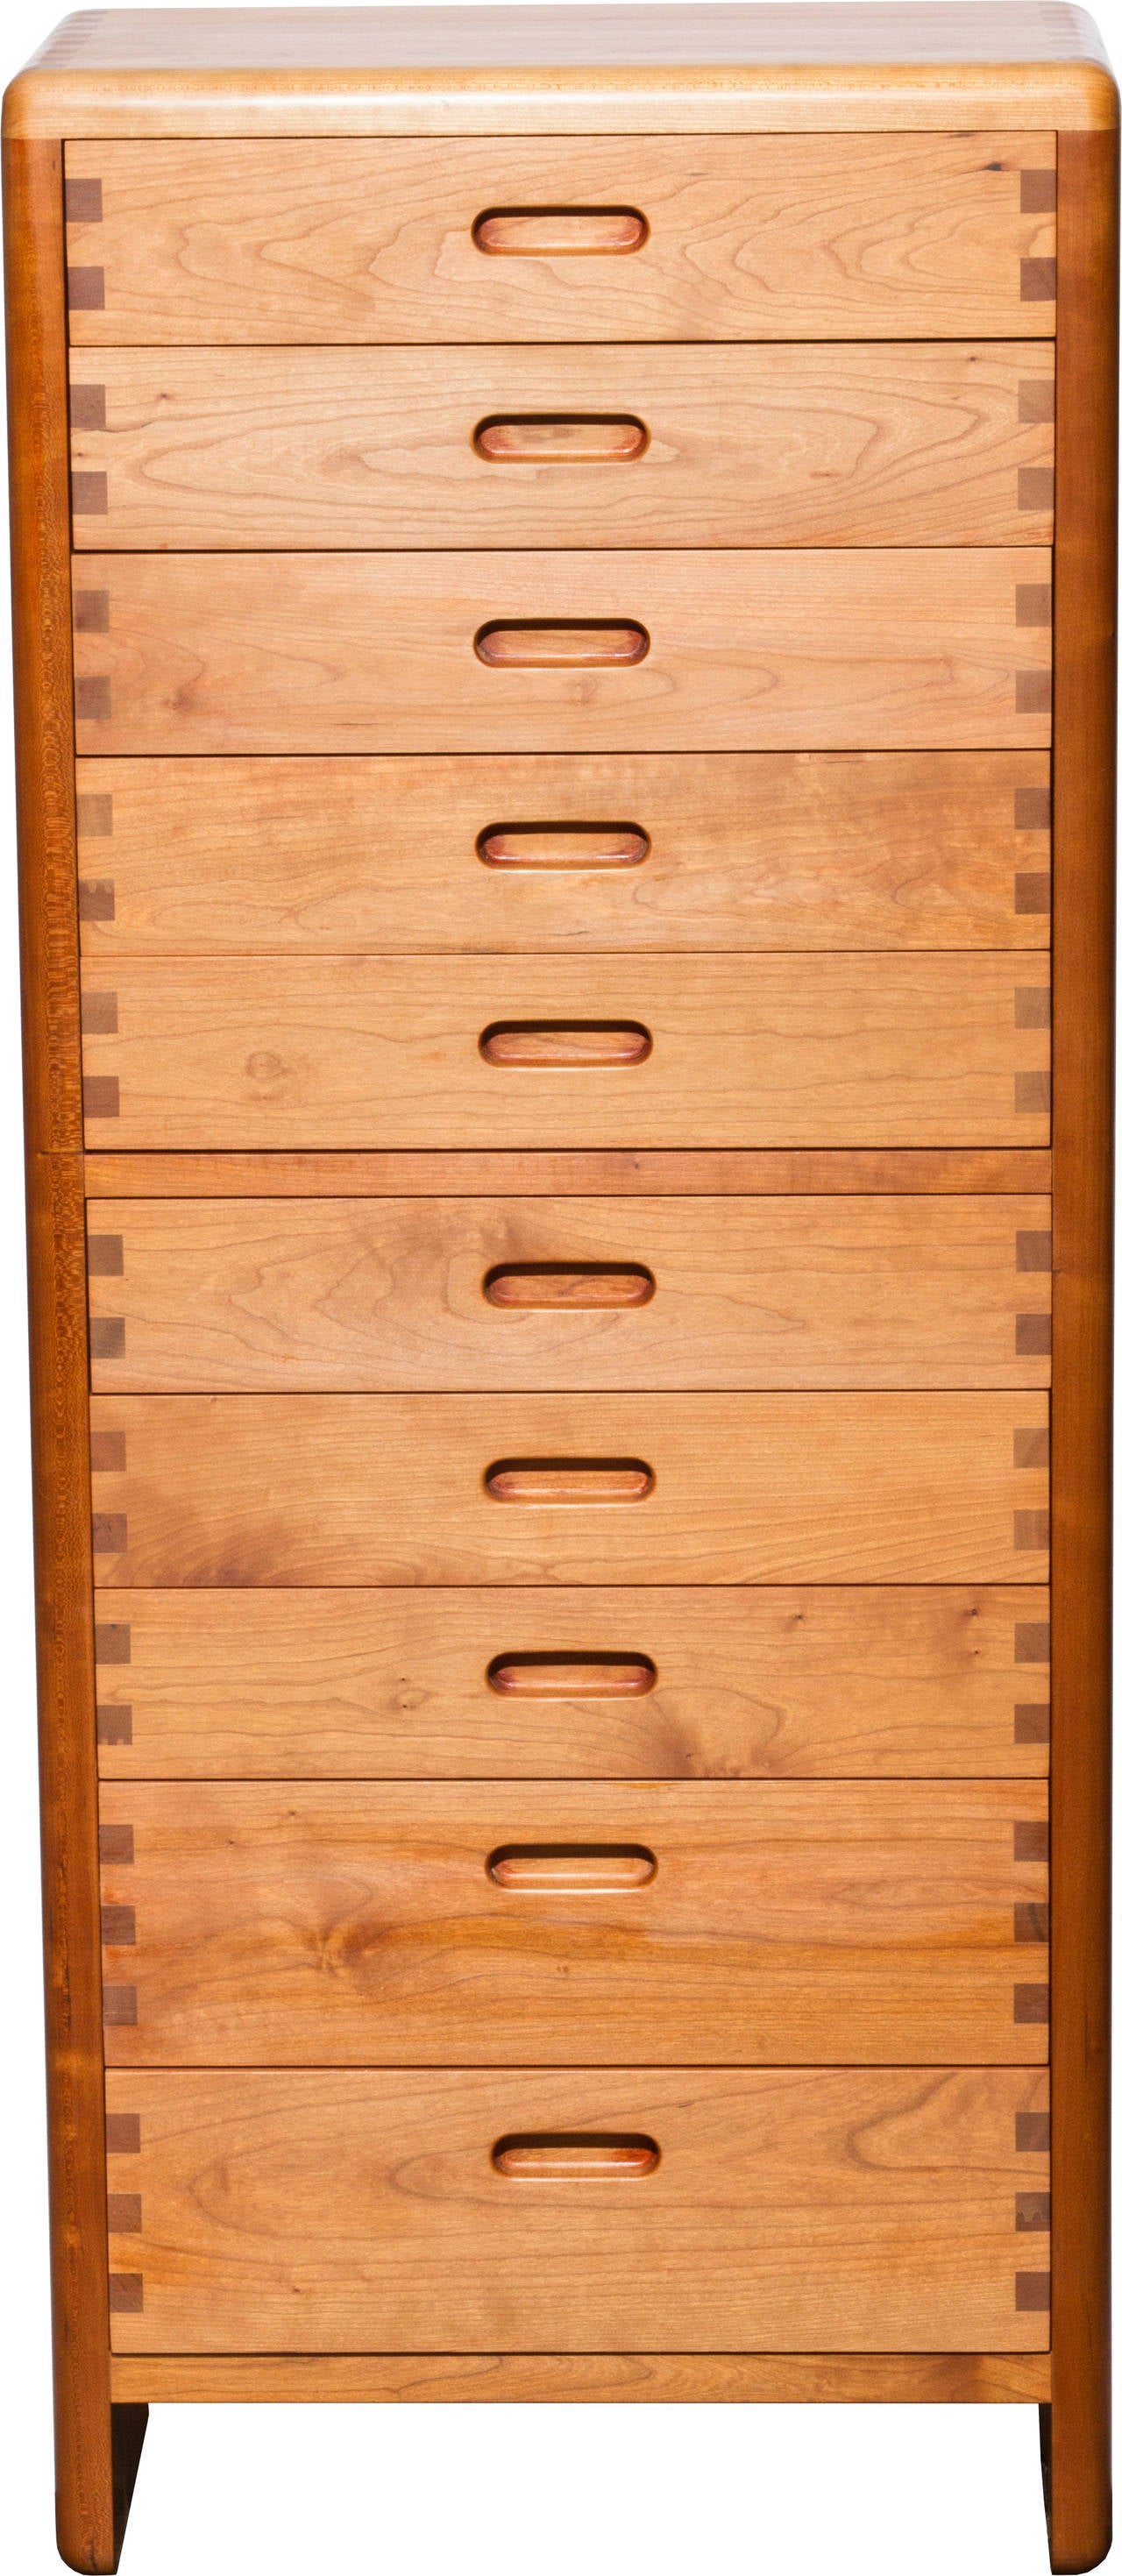 This is a simply designed and well made chest. It is number 2611. Perfect for jewelry or men's shirts.